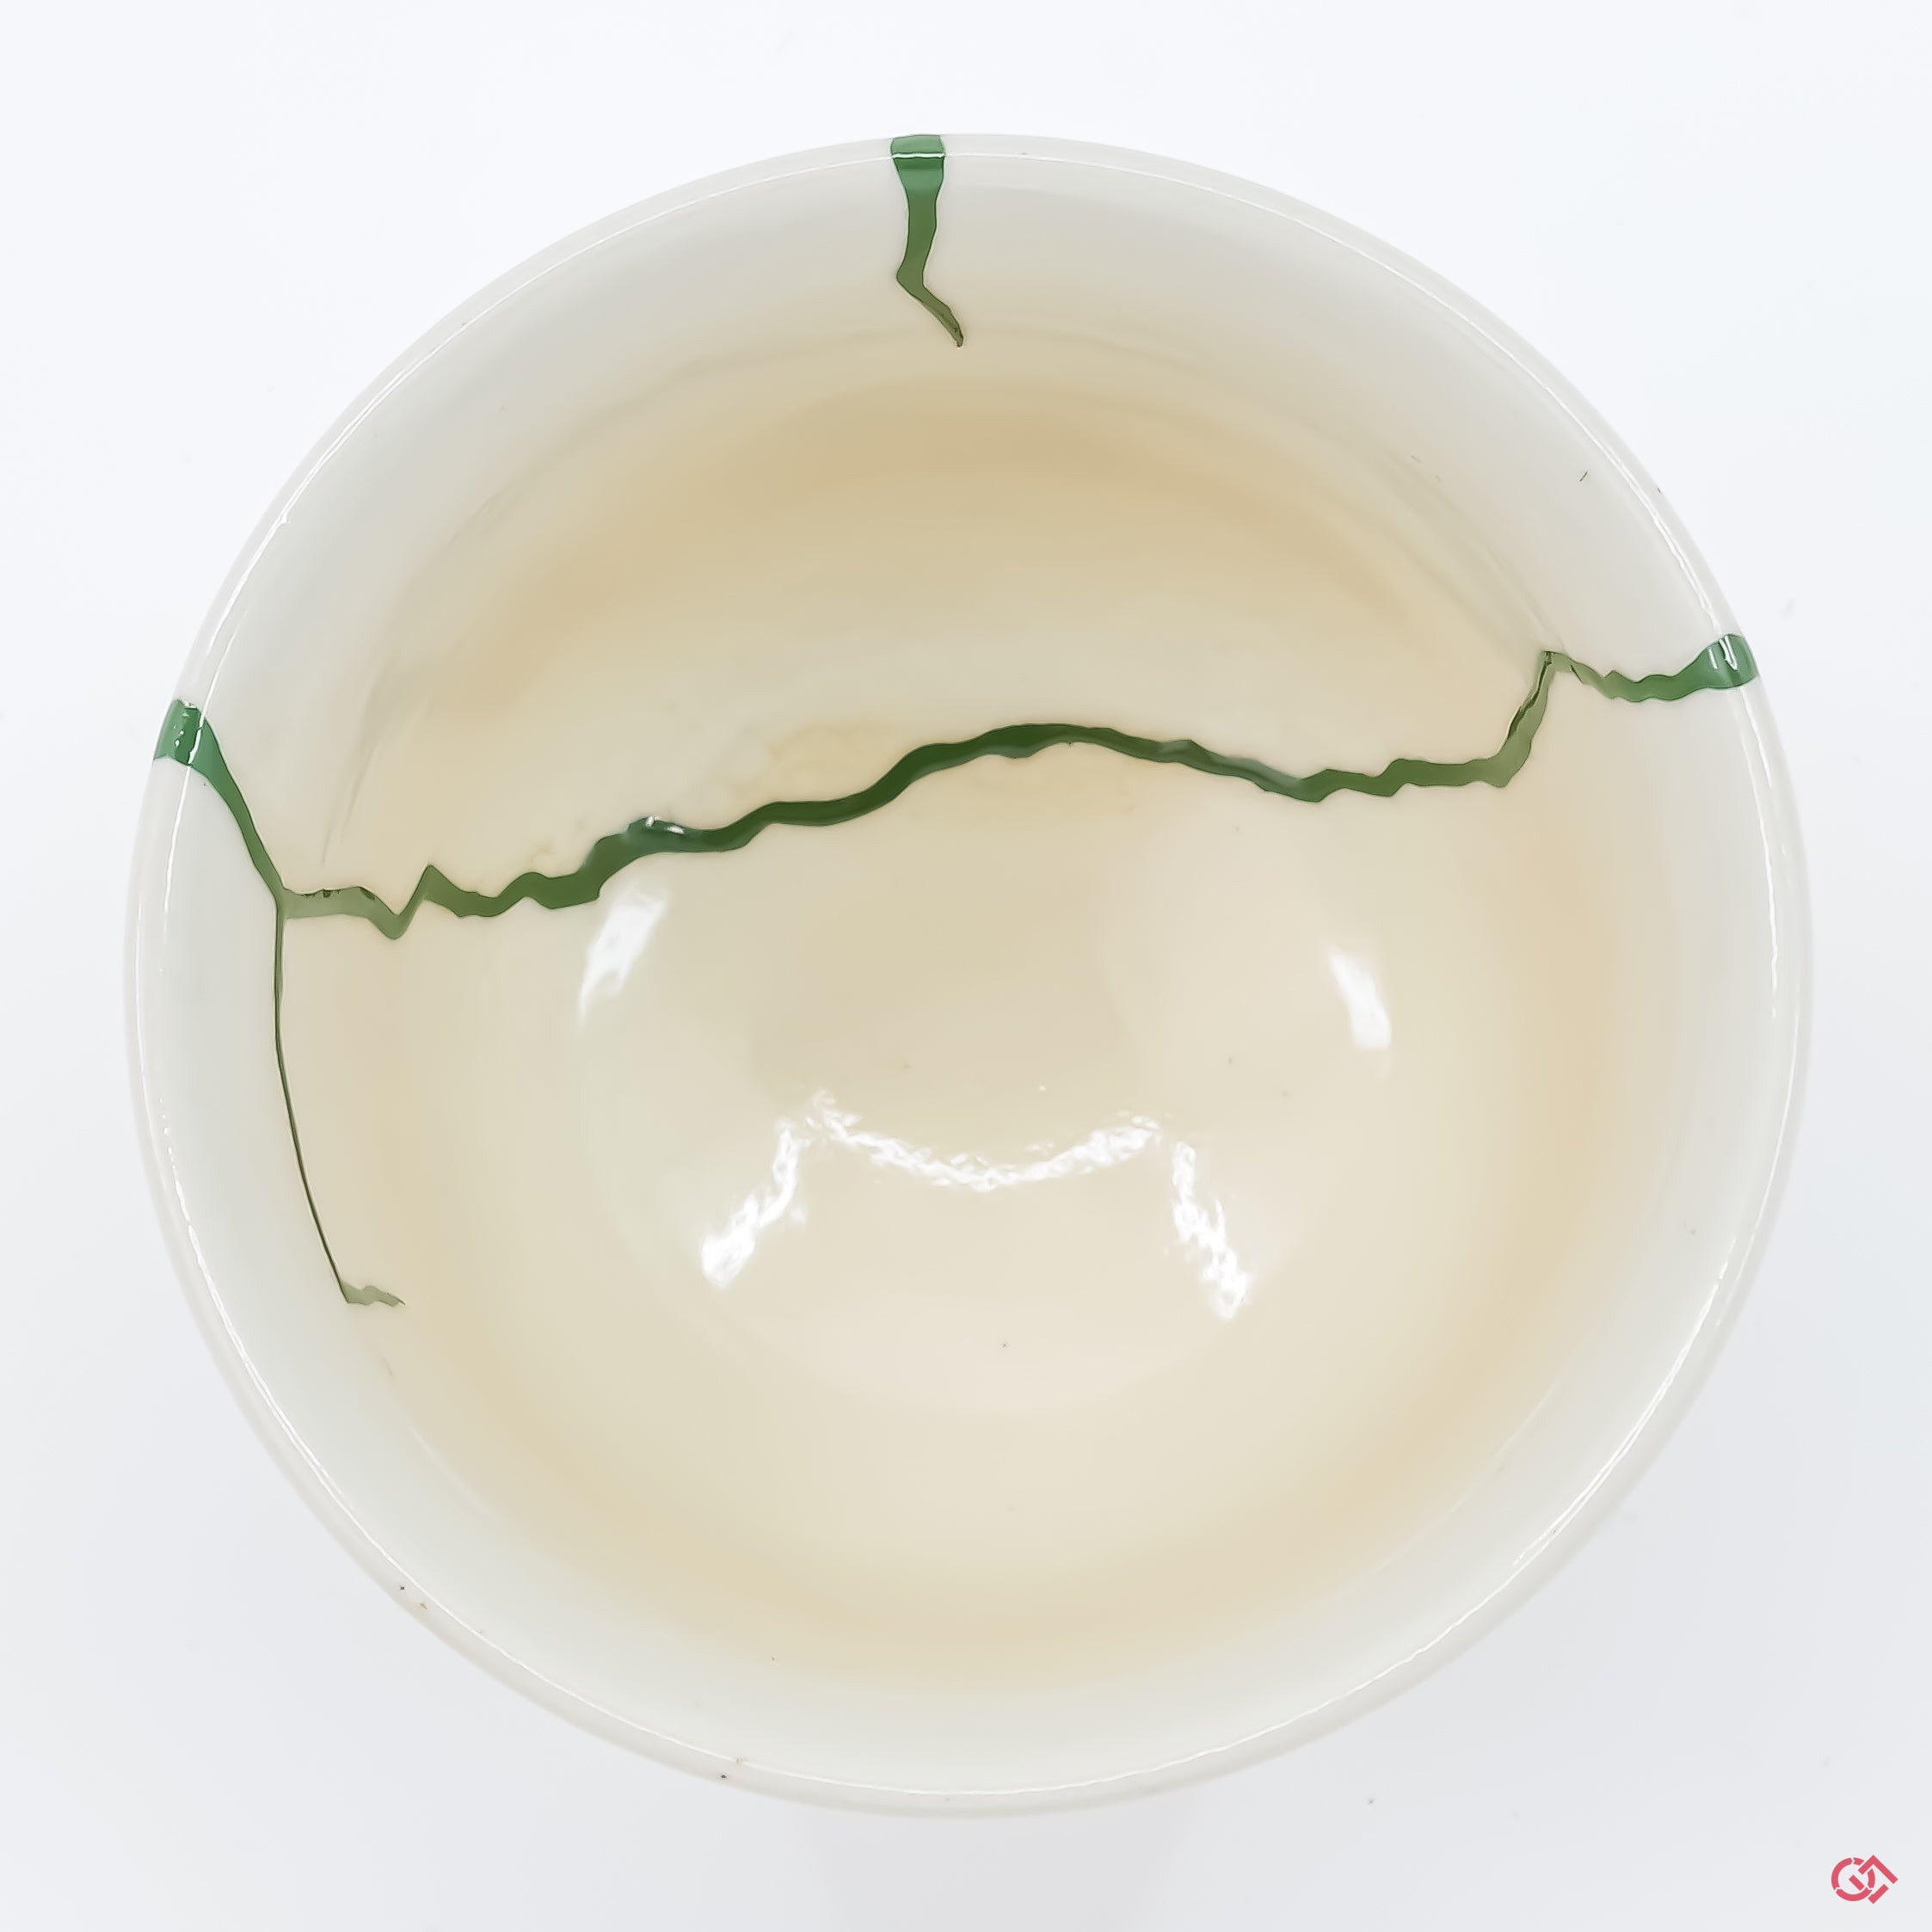 Photo of the top side of an authentic Kintsugi pottery, showing its overall design and features.